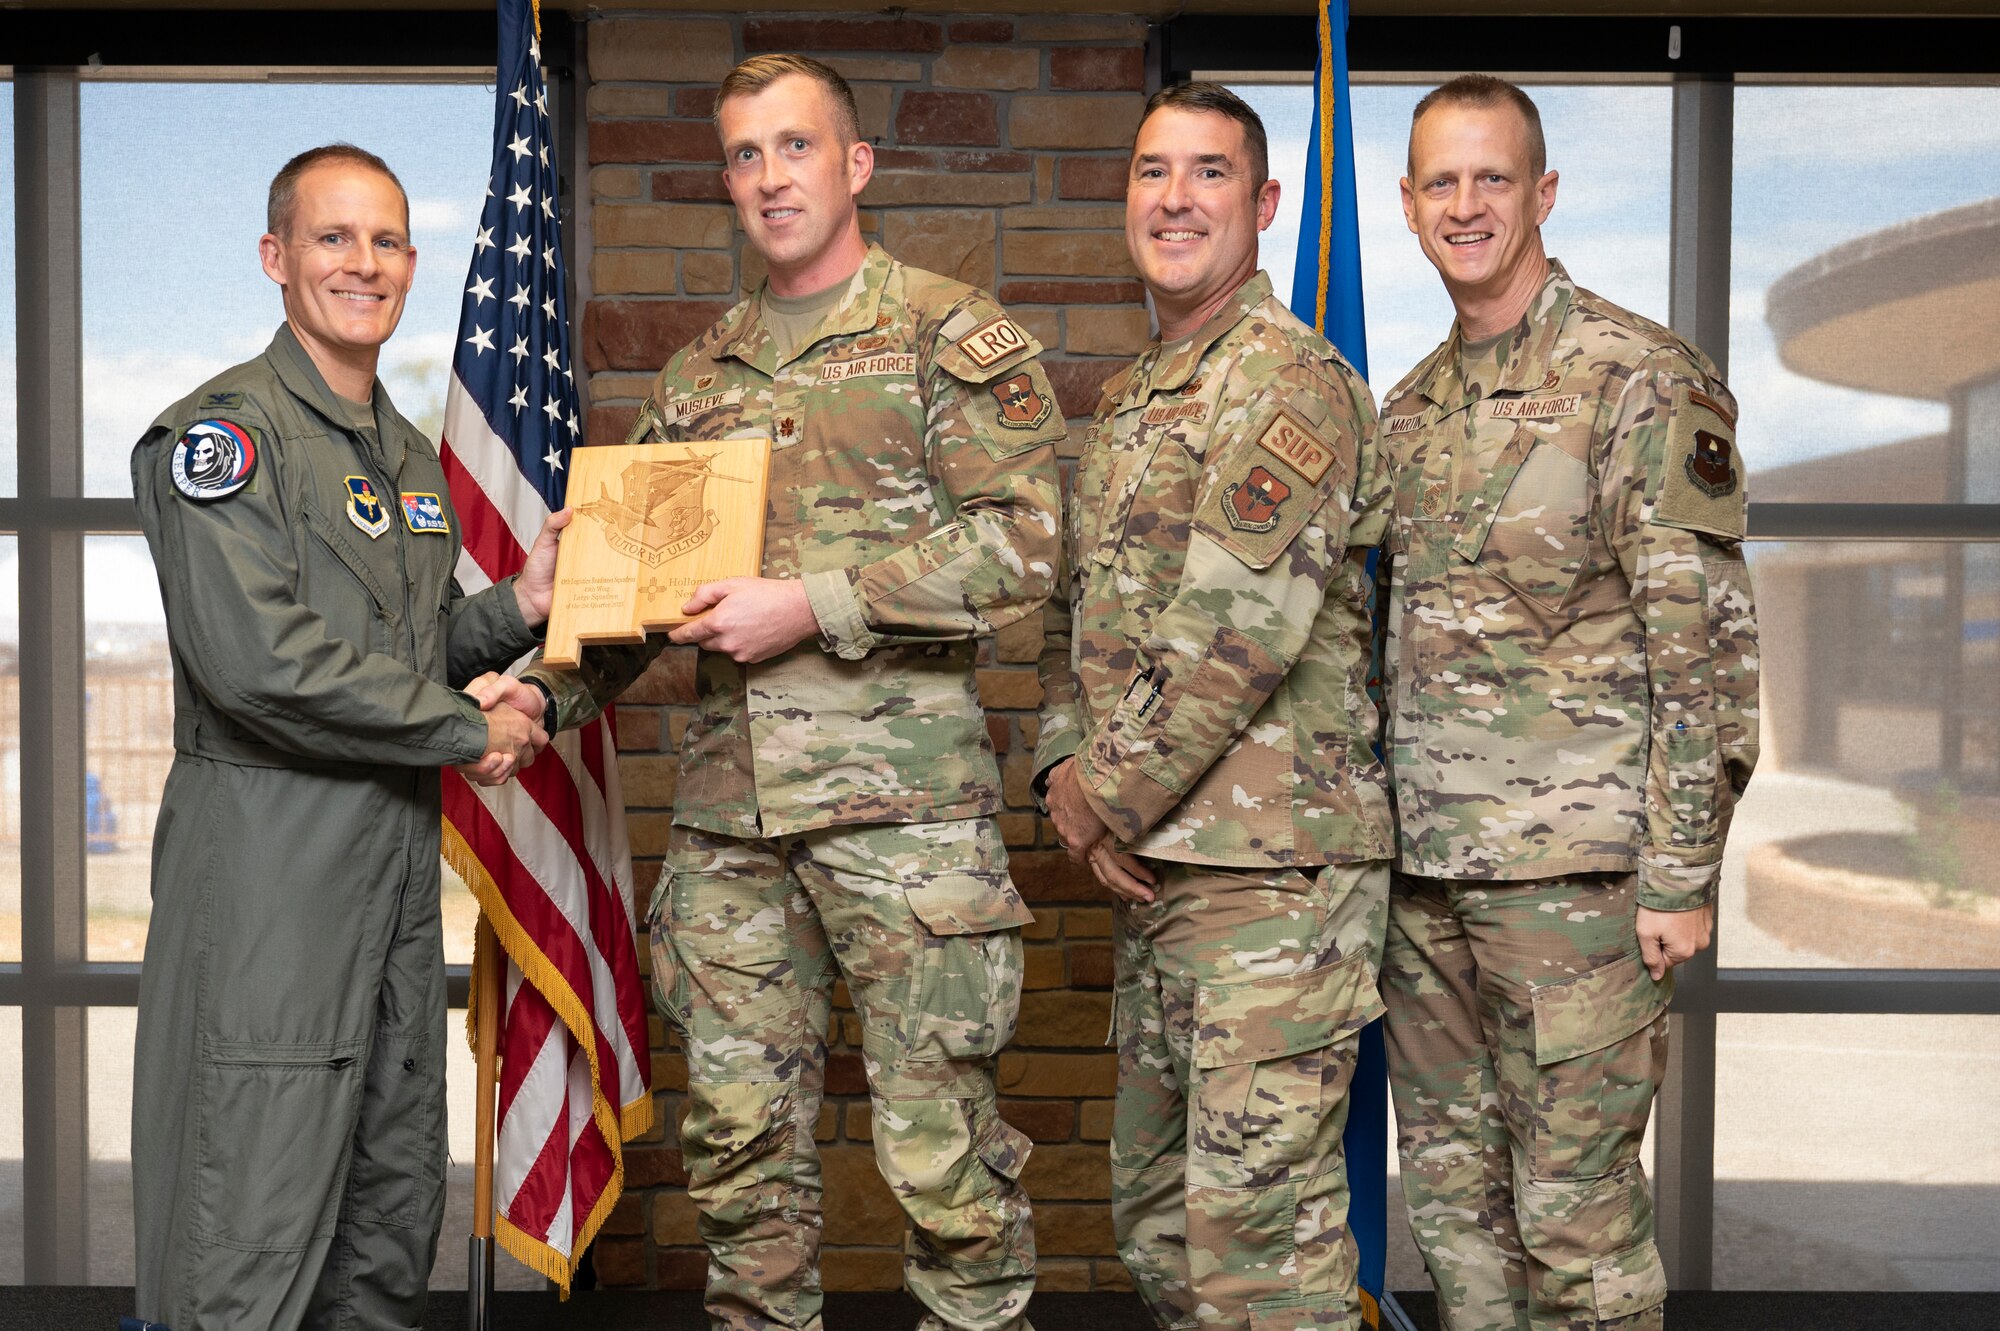 U.S. Air Force Maj. Daniel Musleve, left, and U.S. Air Force Chief Master Sgt. Scott Fitzpatrick, from the Logistics Readiness Squadron, accepts the 49th Wing’s Large Unit of the Quarter Award, during the 49th Wing’s 2nd Quarter Award ceremony at Holloman Air Force Base, New Mexico, Aug. 11, 2023. Quarterly award winners were selected based on their technical expertise, demonstration of leadership and job performance. (U.S. Air Force photo by Airman 1st Class Michelle Ferrari)